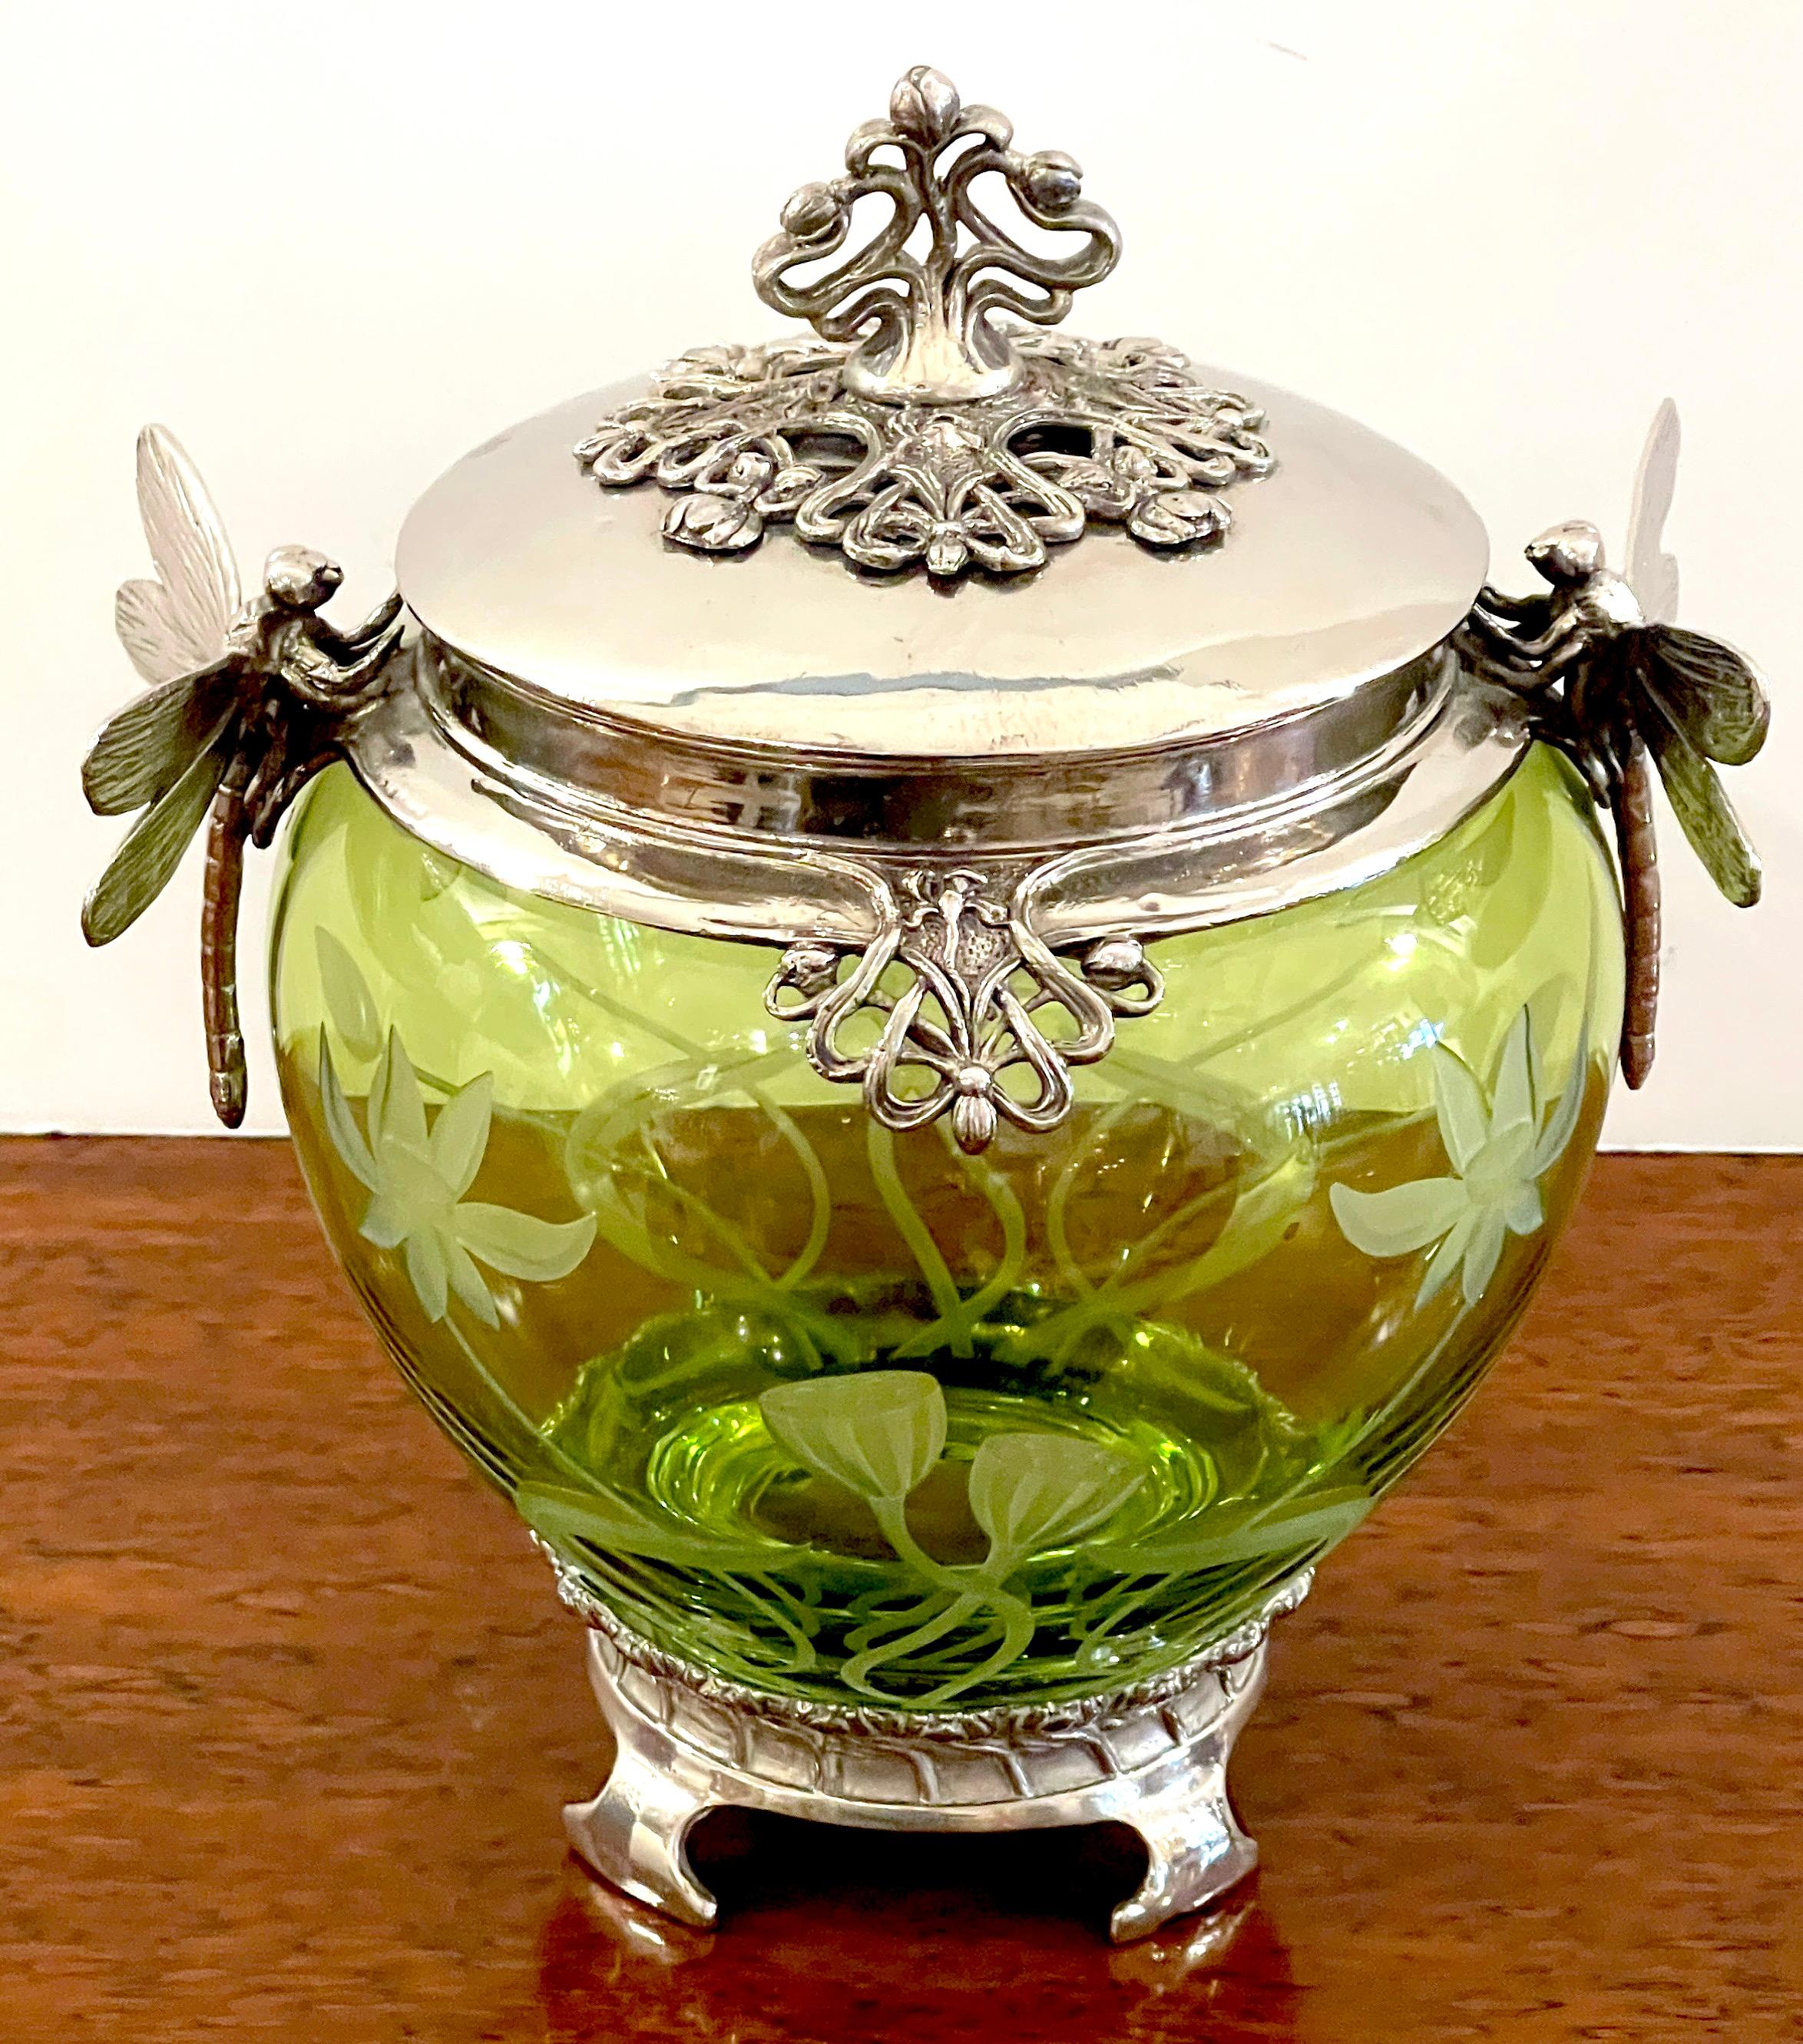 20th Century WMF Art Nouveau Silverplated Dragonfly Motif & Engraved Green Crystal Box For Sale